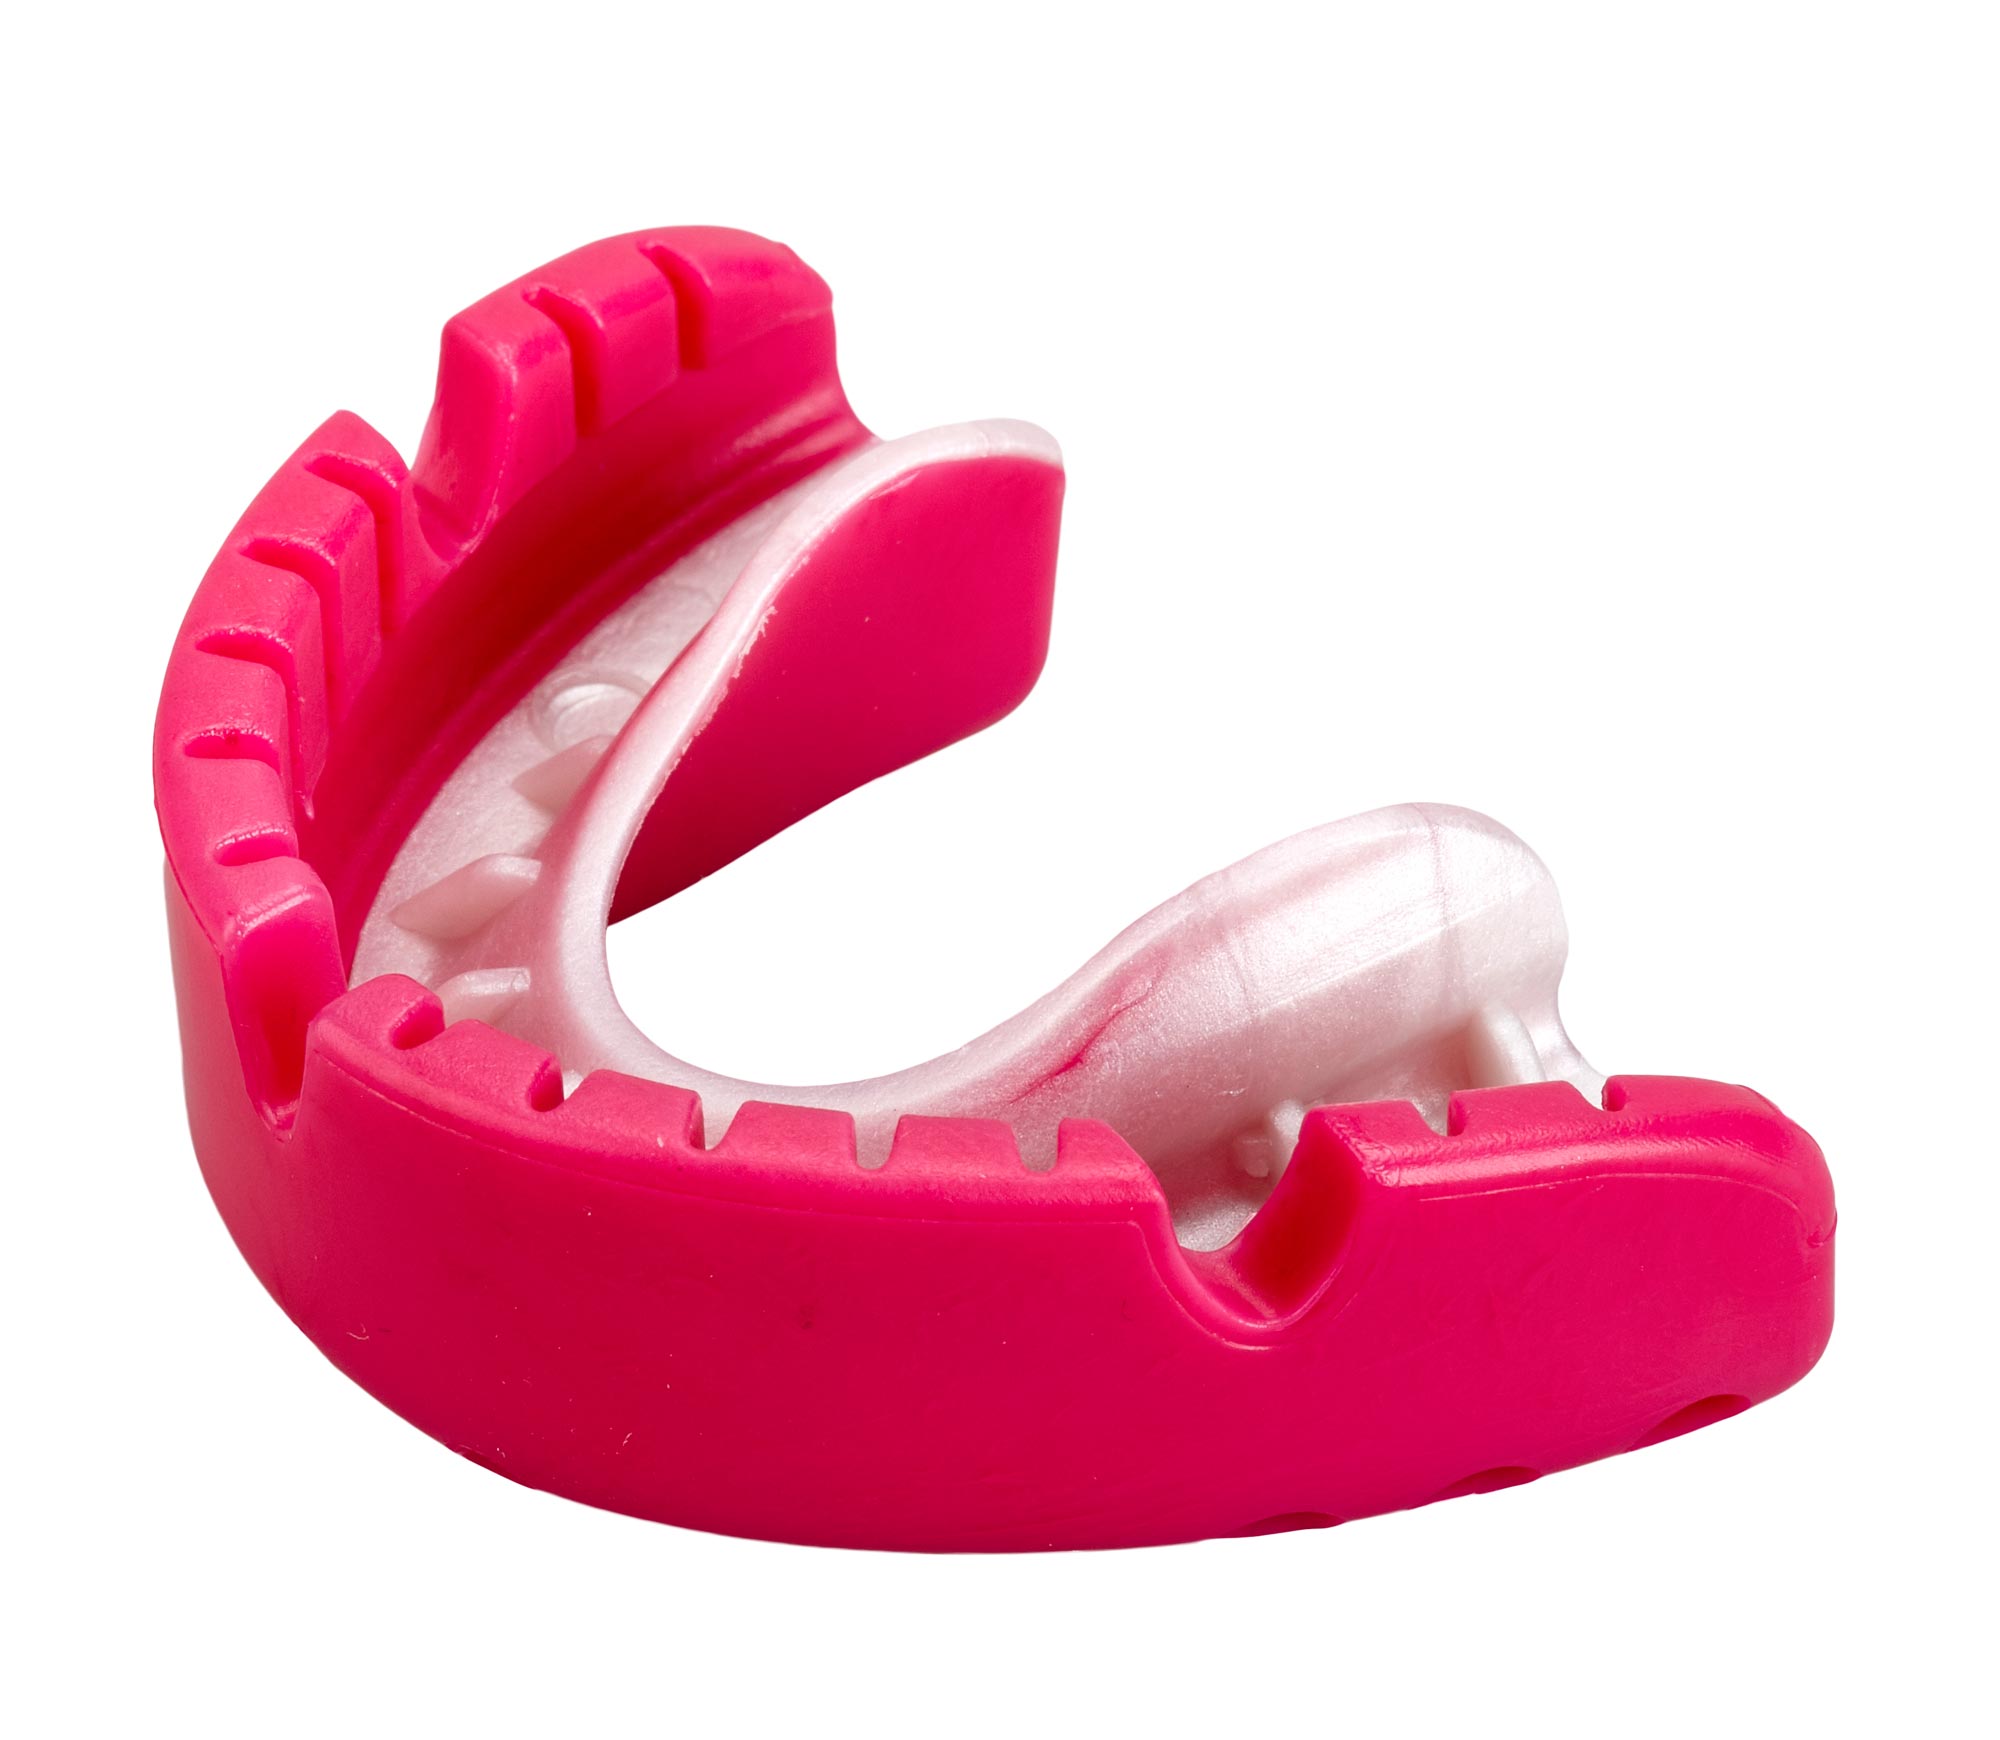 OPRO Mouthguard Gold Level Senior Braces pink/pearl